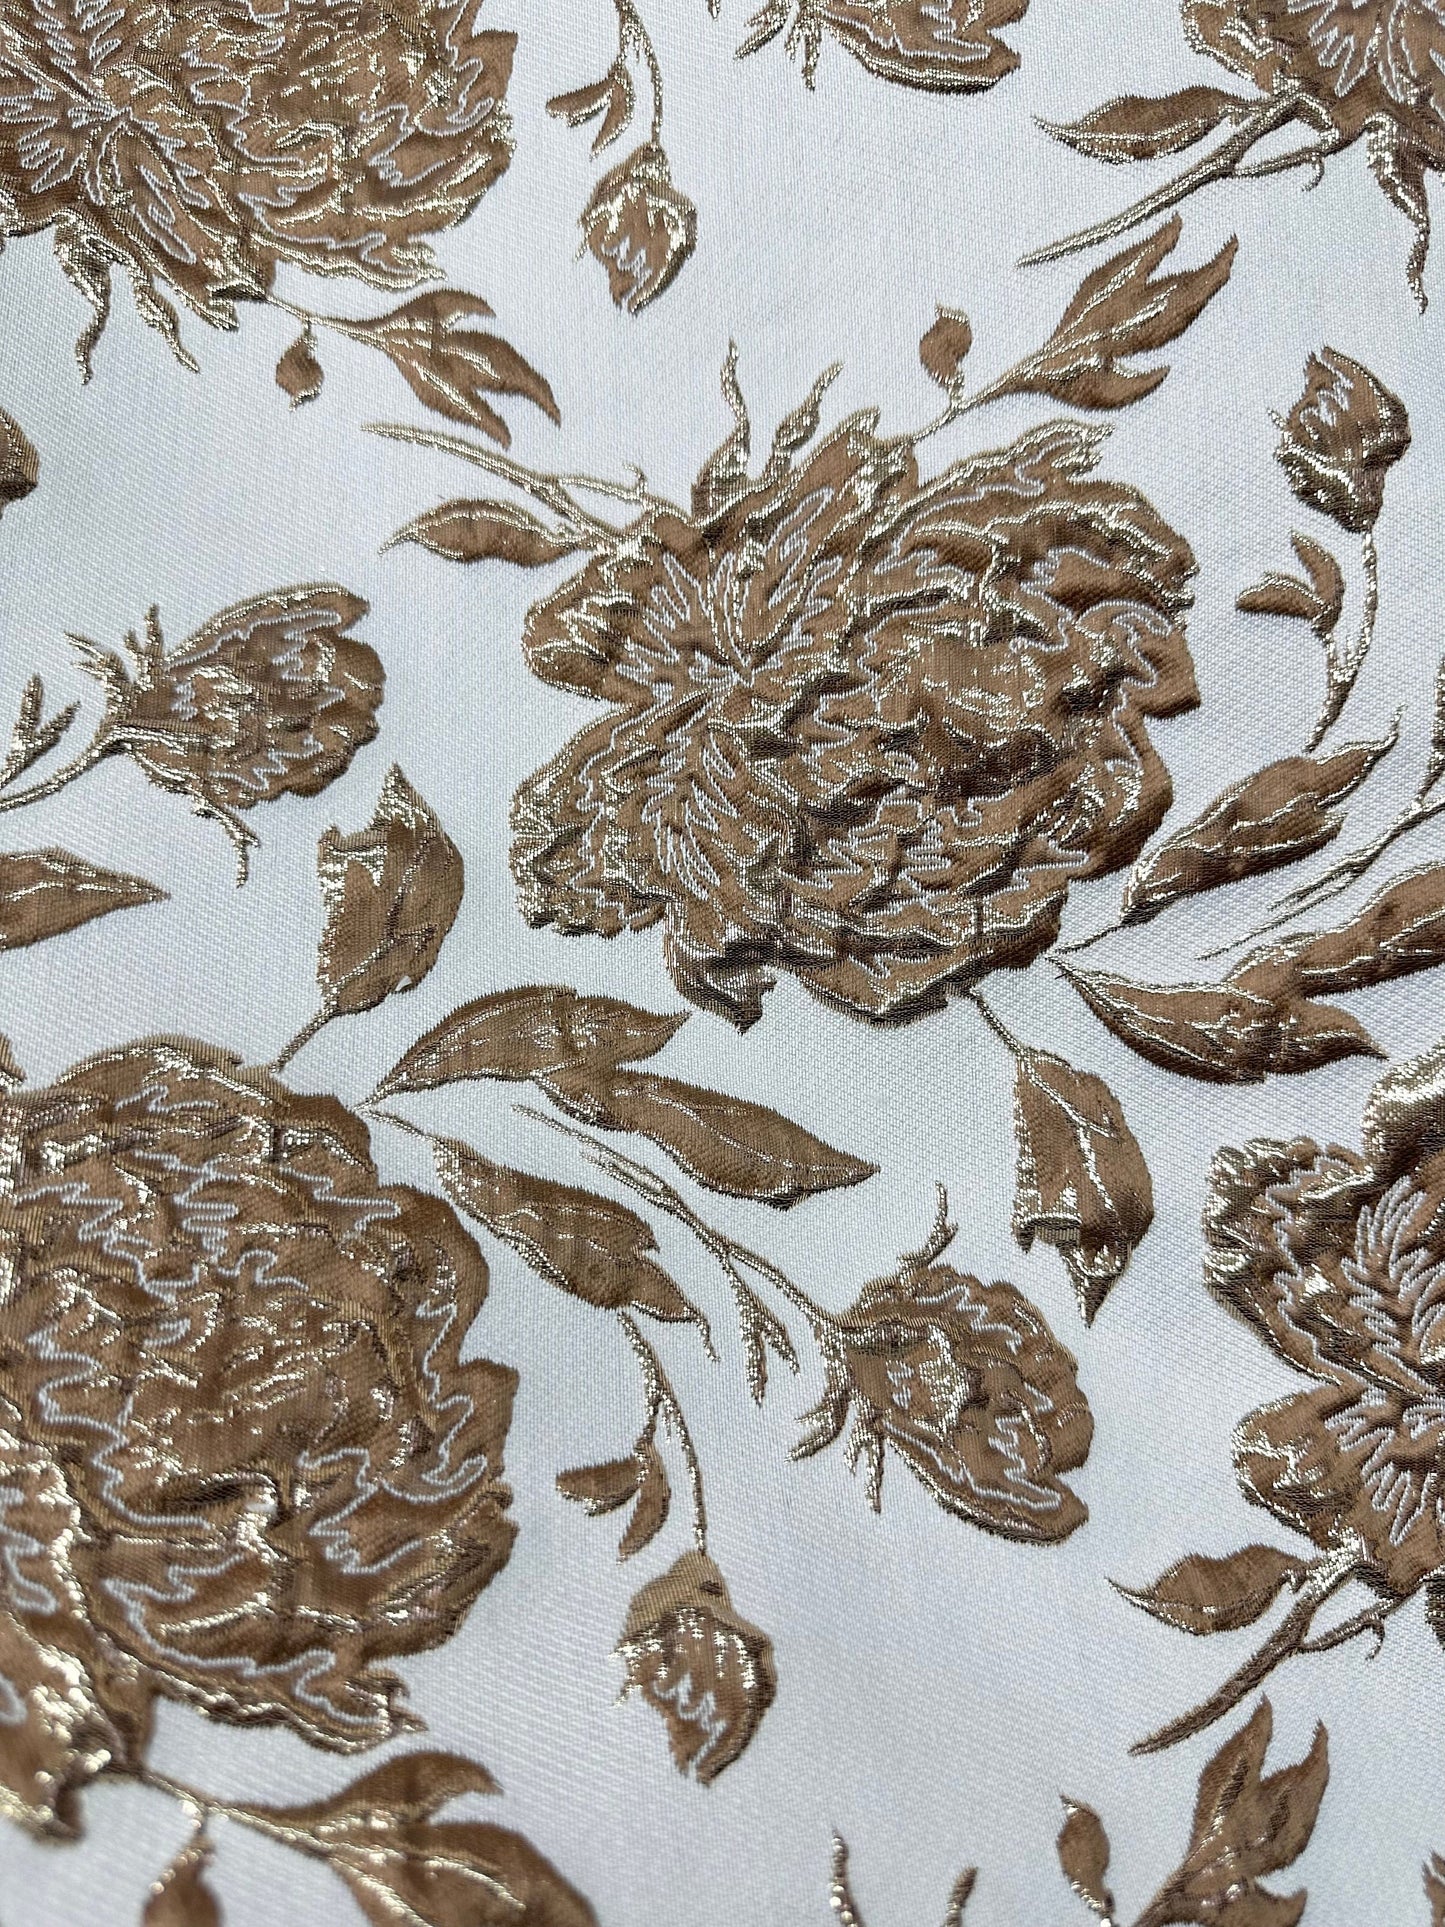 LIGHT BROWN GOLD Floral Brocade Fabric (60 in.) Sold By The Yard